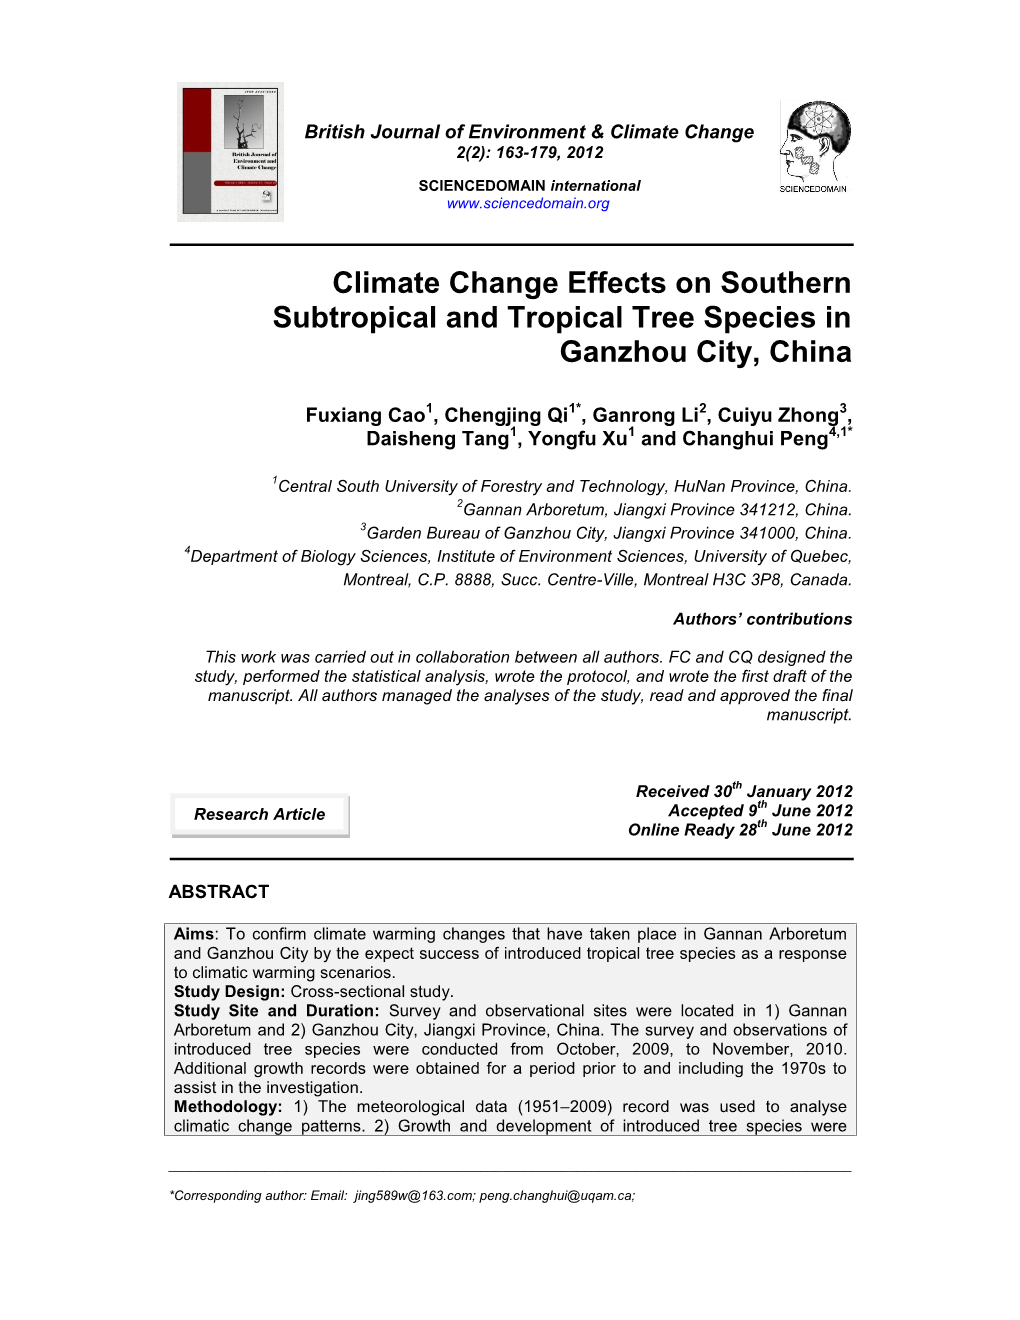 Climate Change Effects on Southern Subtropical and Tropical Tree Species in Ganzhou City, China